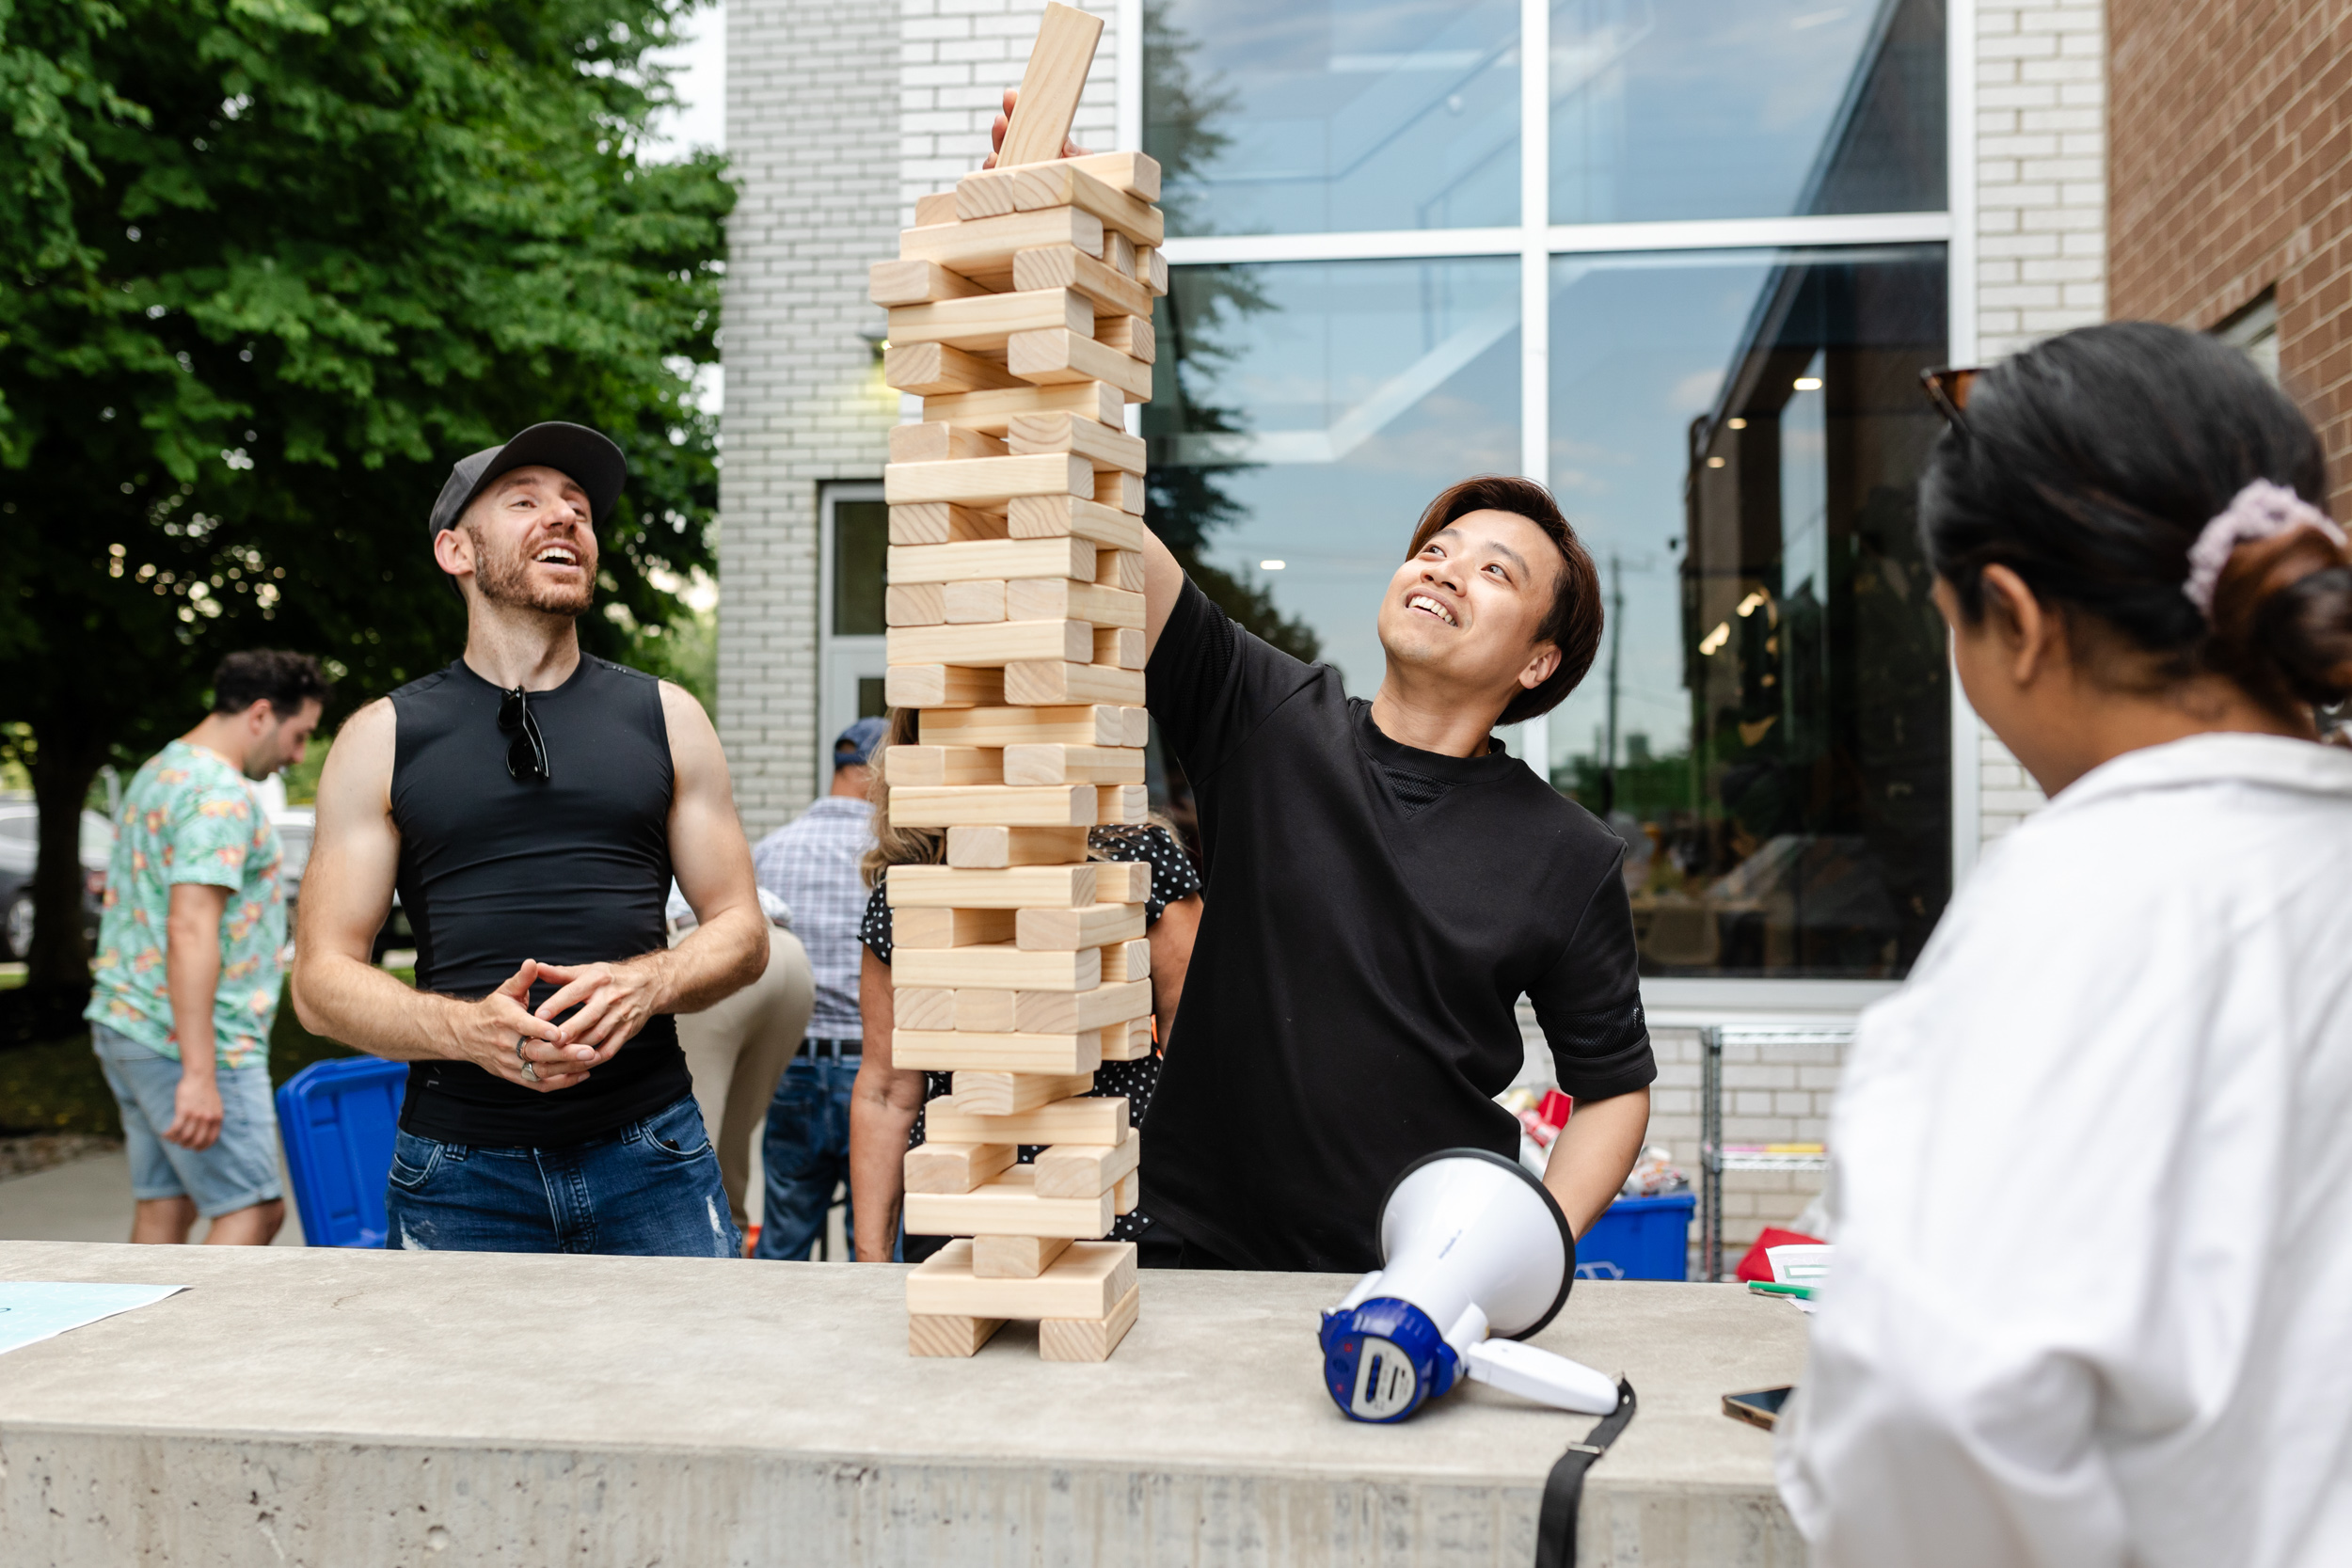 Social Event: A group of people playing a game of Jenga at a gathering.